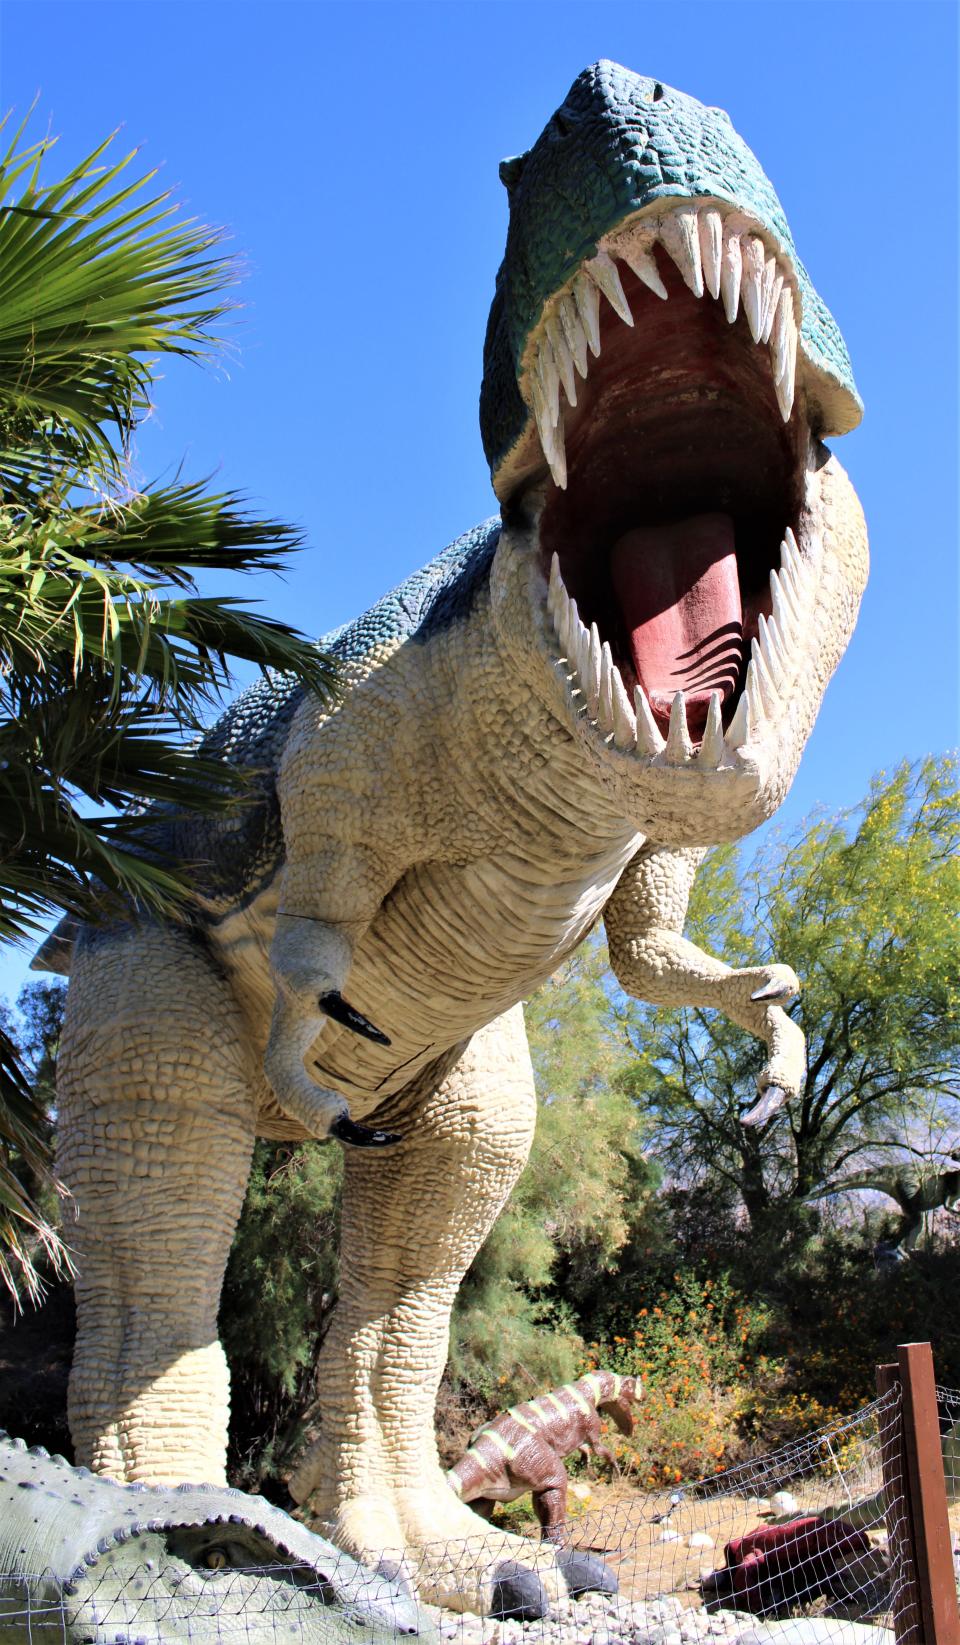 Cabazon Dinosaur Park in the California desert isn't just a movie hot spot, it's full of fun and history.